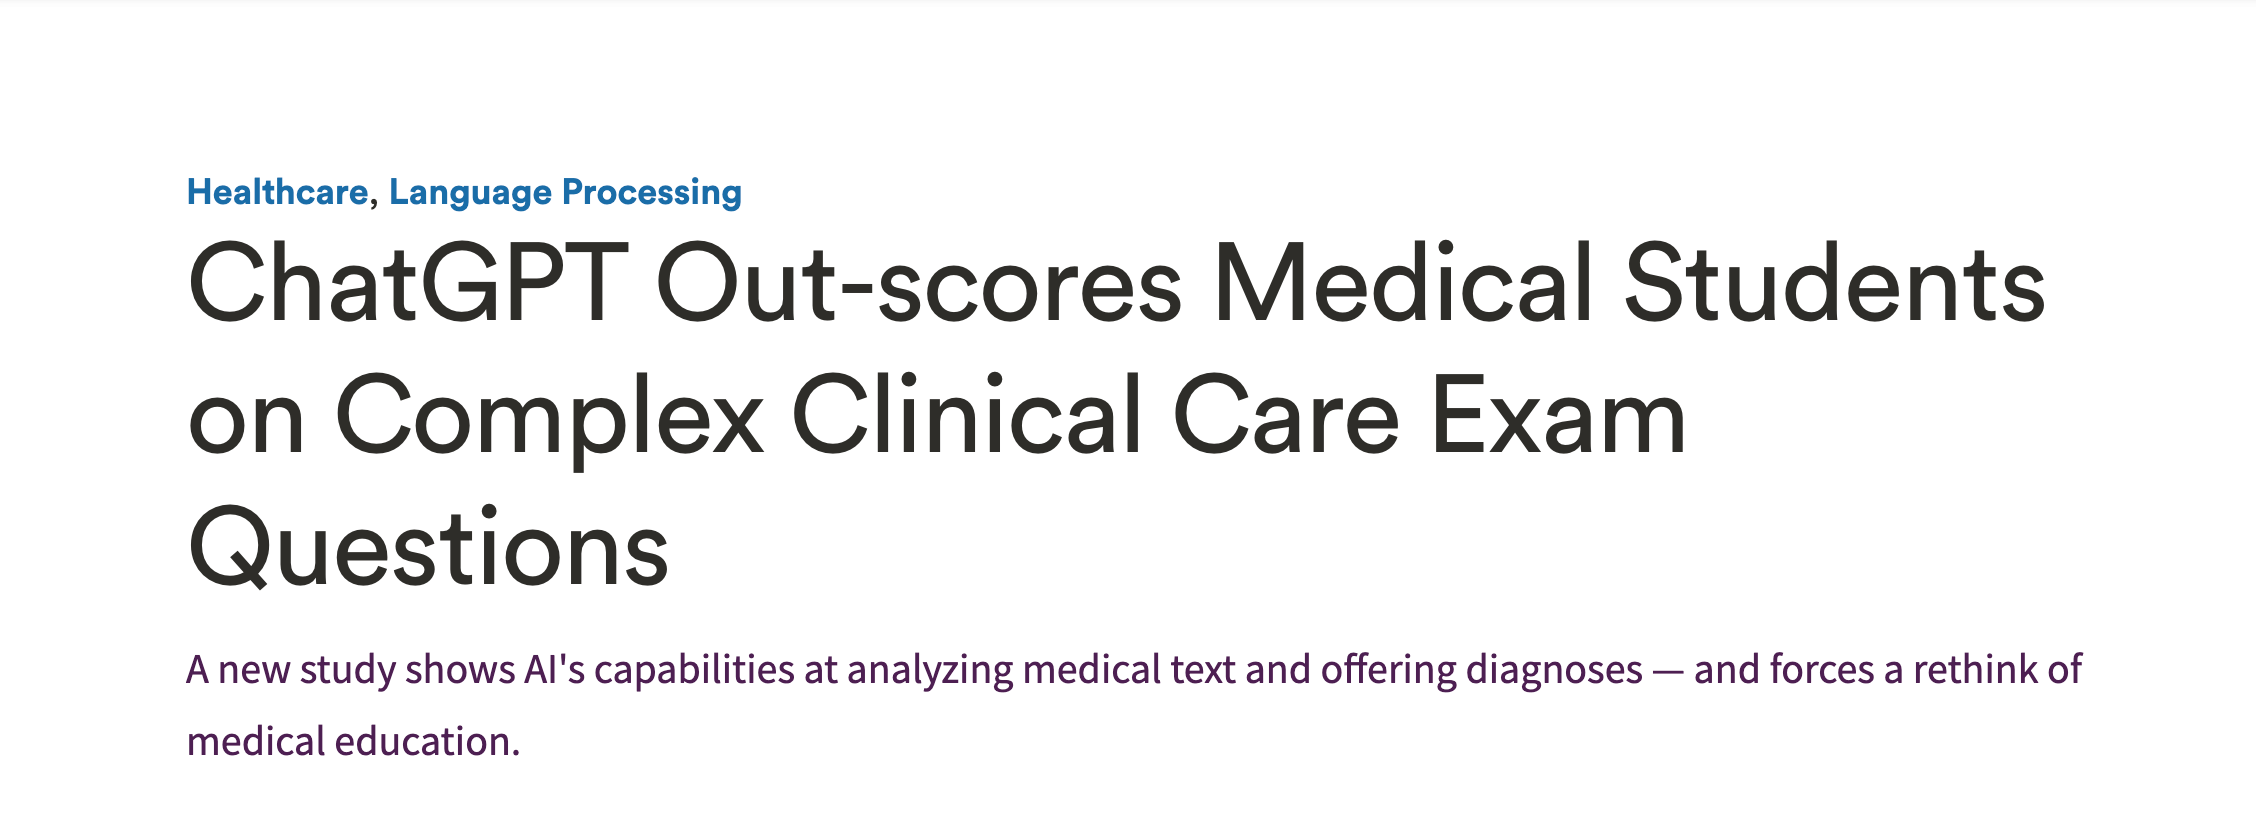 Headline saying "ChatGPT out-scores medical students on complex clinical care exam questions"